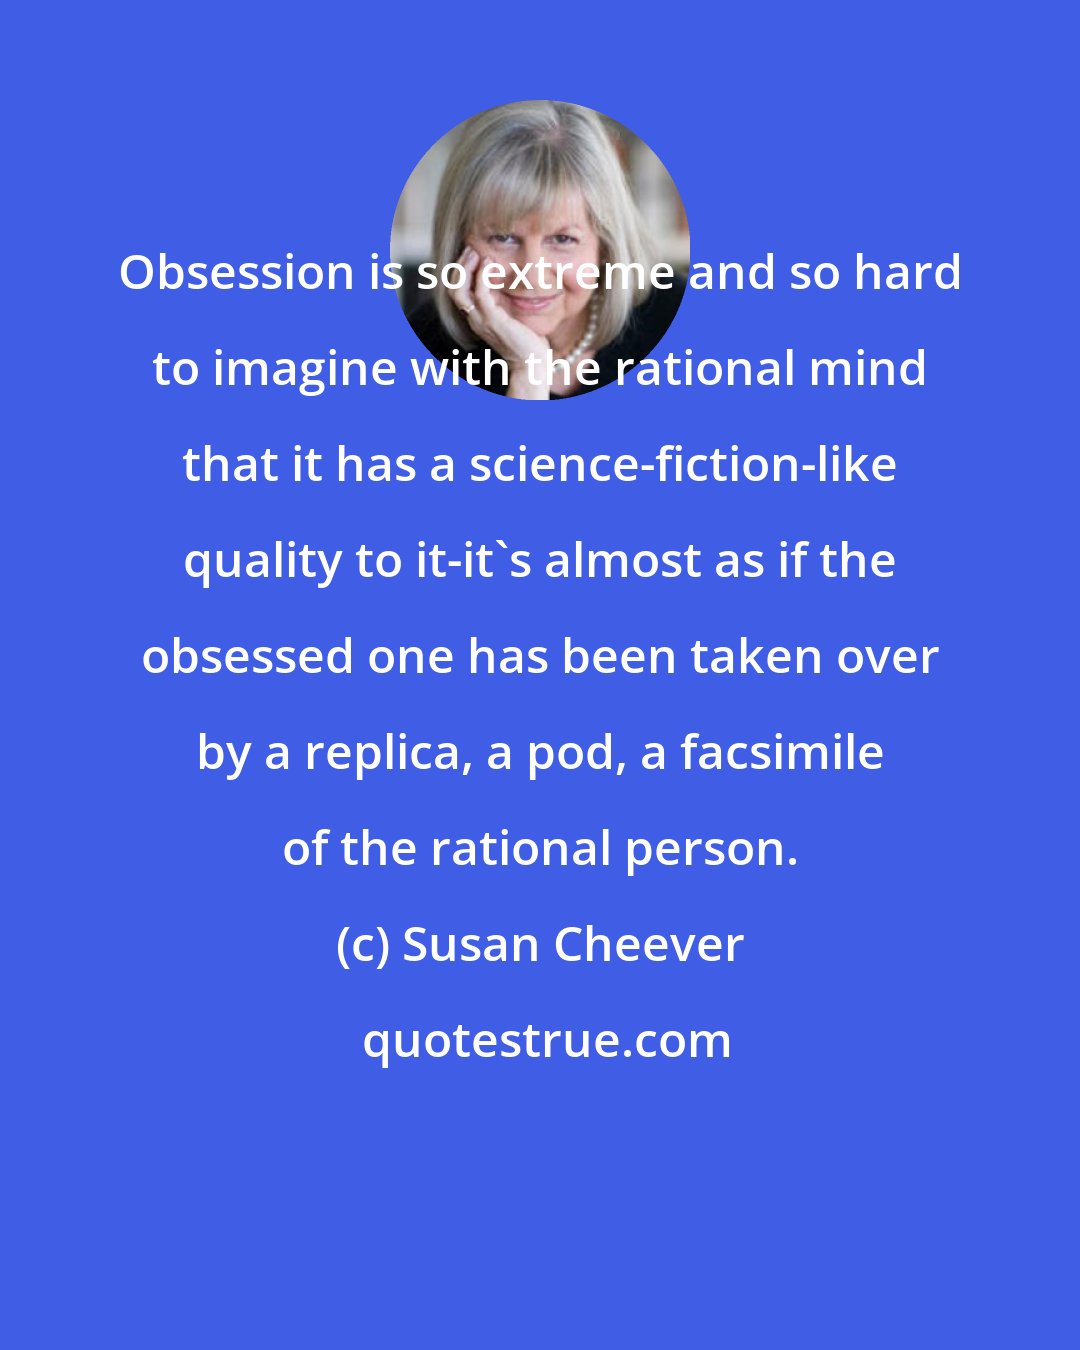 Susan Cheever: Obsession is so extreme and so hard to imagine with the rational mind that it has a science-fiction-like quality to it-it's almost as if the obsessed one has been taken over by a replica, a pod, a facsimile of the rational person.